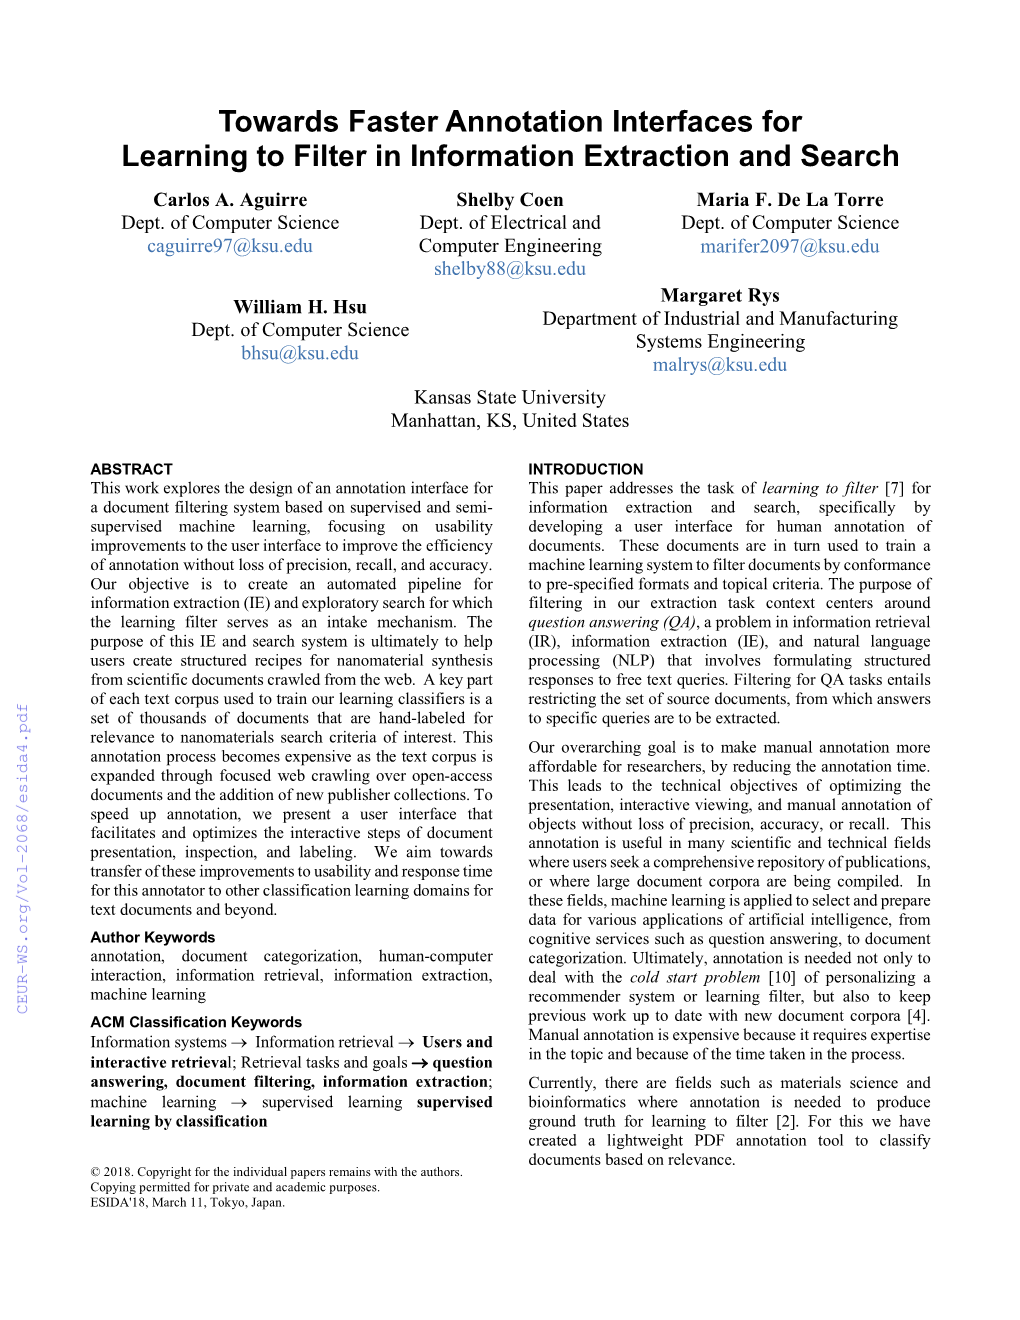 Towards Faster Annotation Interfaces for Learning to Filter in Information Extraction and Search Carlos A